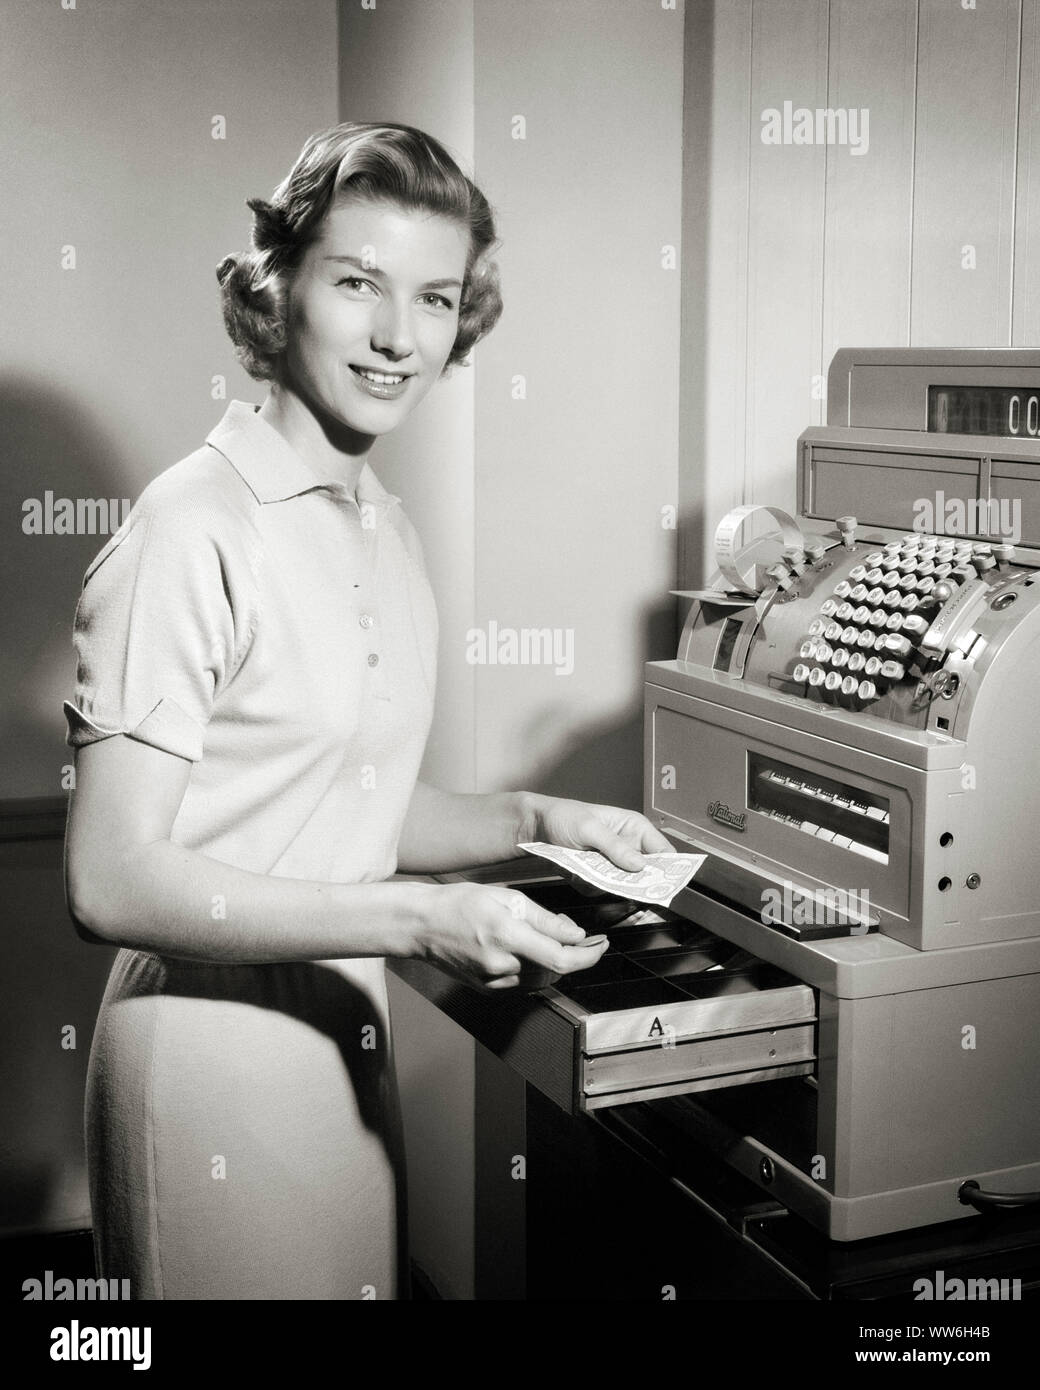 1950s SMILING WOMAN RETAIL CASHIER STANDING AT OPEN MANUAL CASH REGISTER TILL DRAWER MAKING CHANGE LOOKING AT CAMERA - s6087 HAR001 HARS RETAIL CHANGE LADIES PERSONS CONFIDENCE EXPRESSIONS B&W DRAWER SHOPPER SHOPPERS TILL SELLING MANUAL CUSTOMER SERVICE AT OCCUPATIONS CASHIERS SALESWOMAN SALESWOMEN STYLISH SALESCLERK YOUNG ADULT WOMAN BLACK AND WHITE CASH REGISTER CAUCASIAN ETHNICITY HAR001 OLD FASHIONED Stock Photo